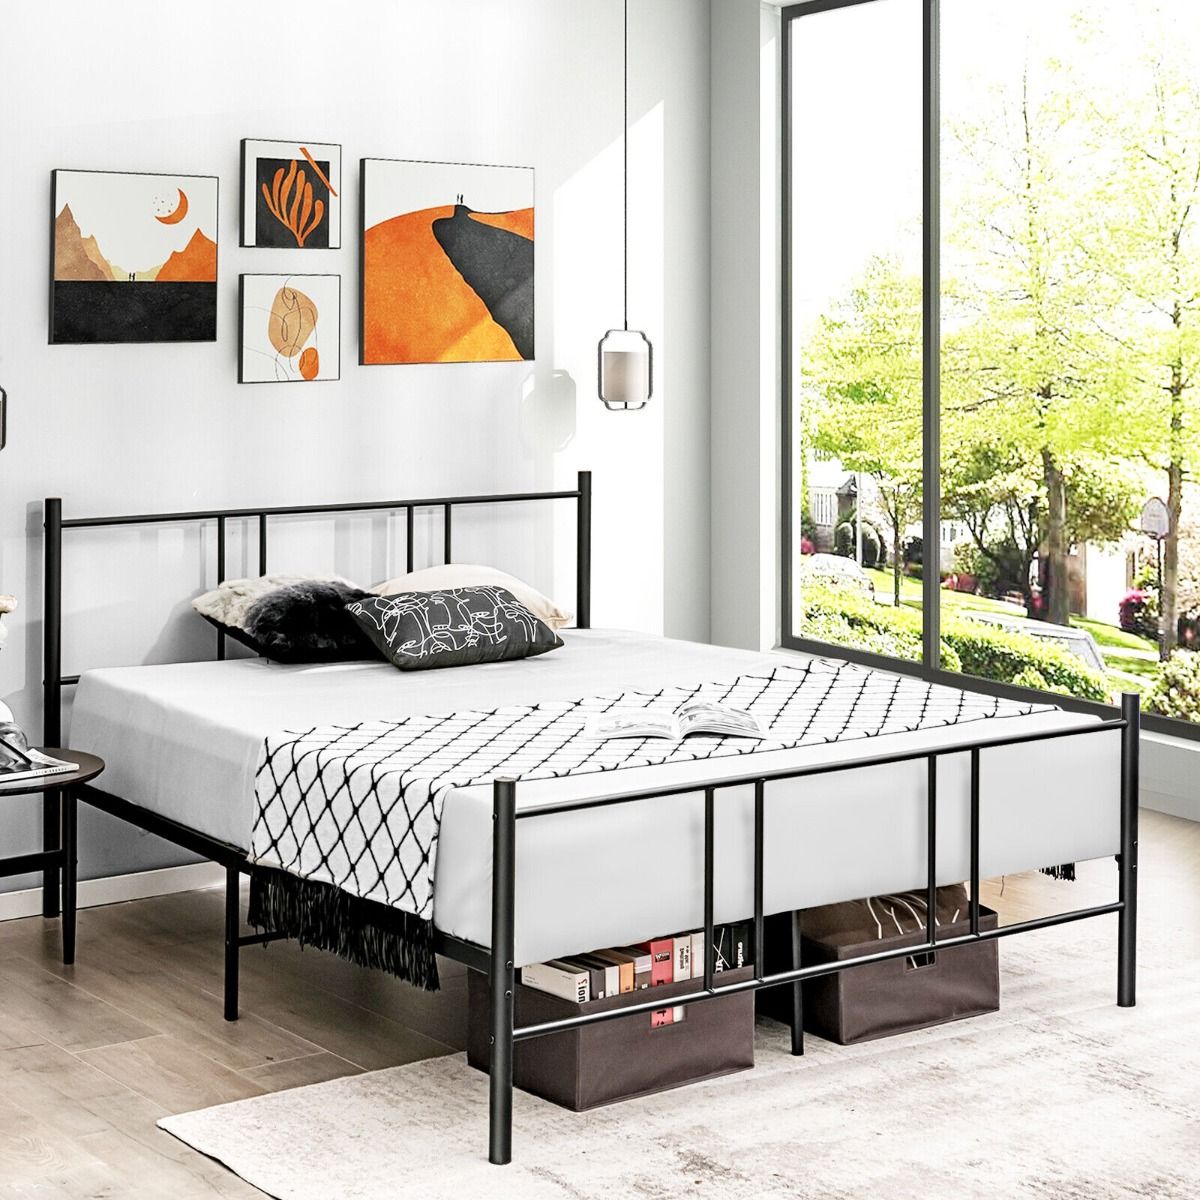 Double Size Slatted Metal Bed Frame with Headboard and Footboard